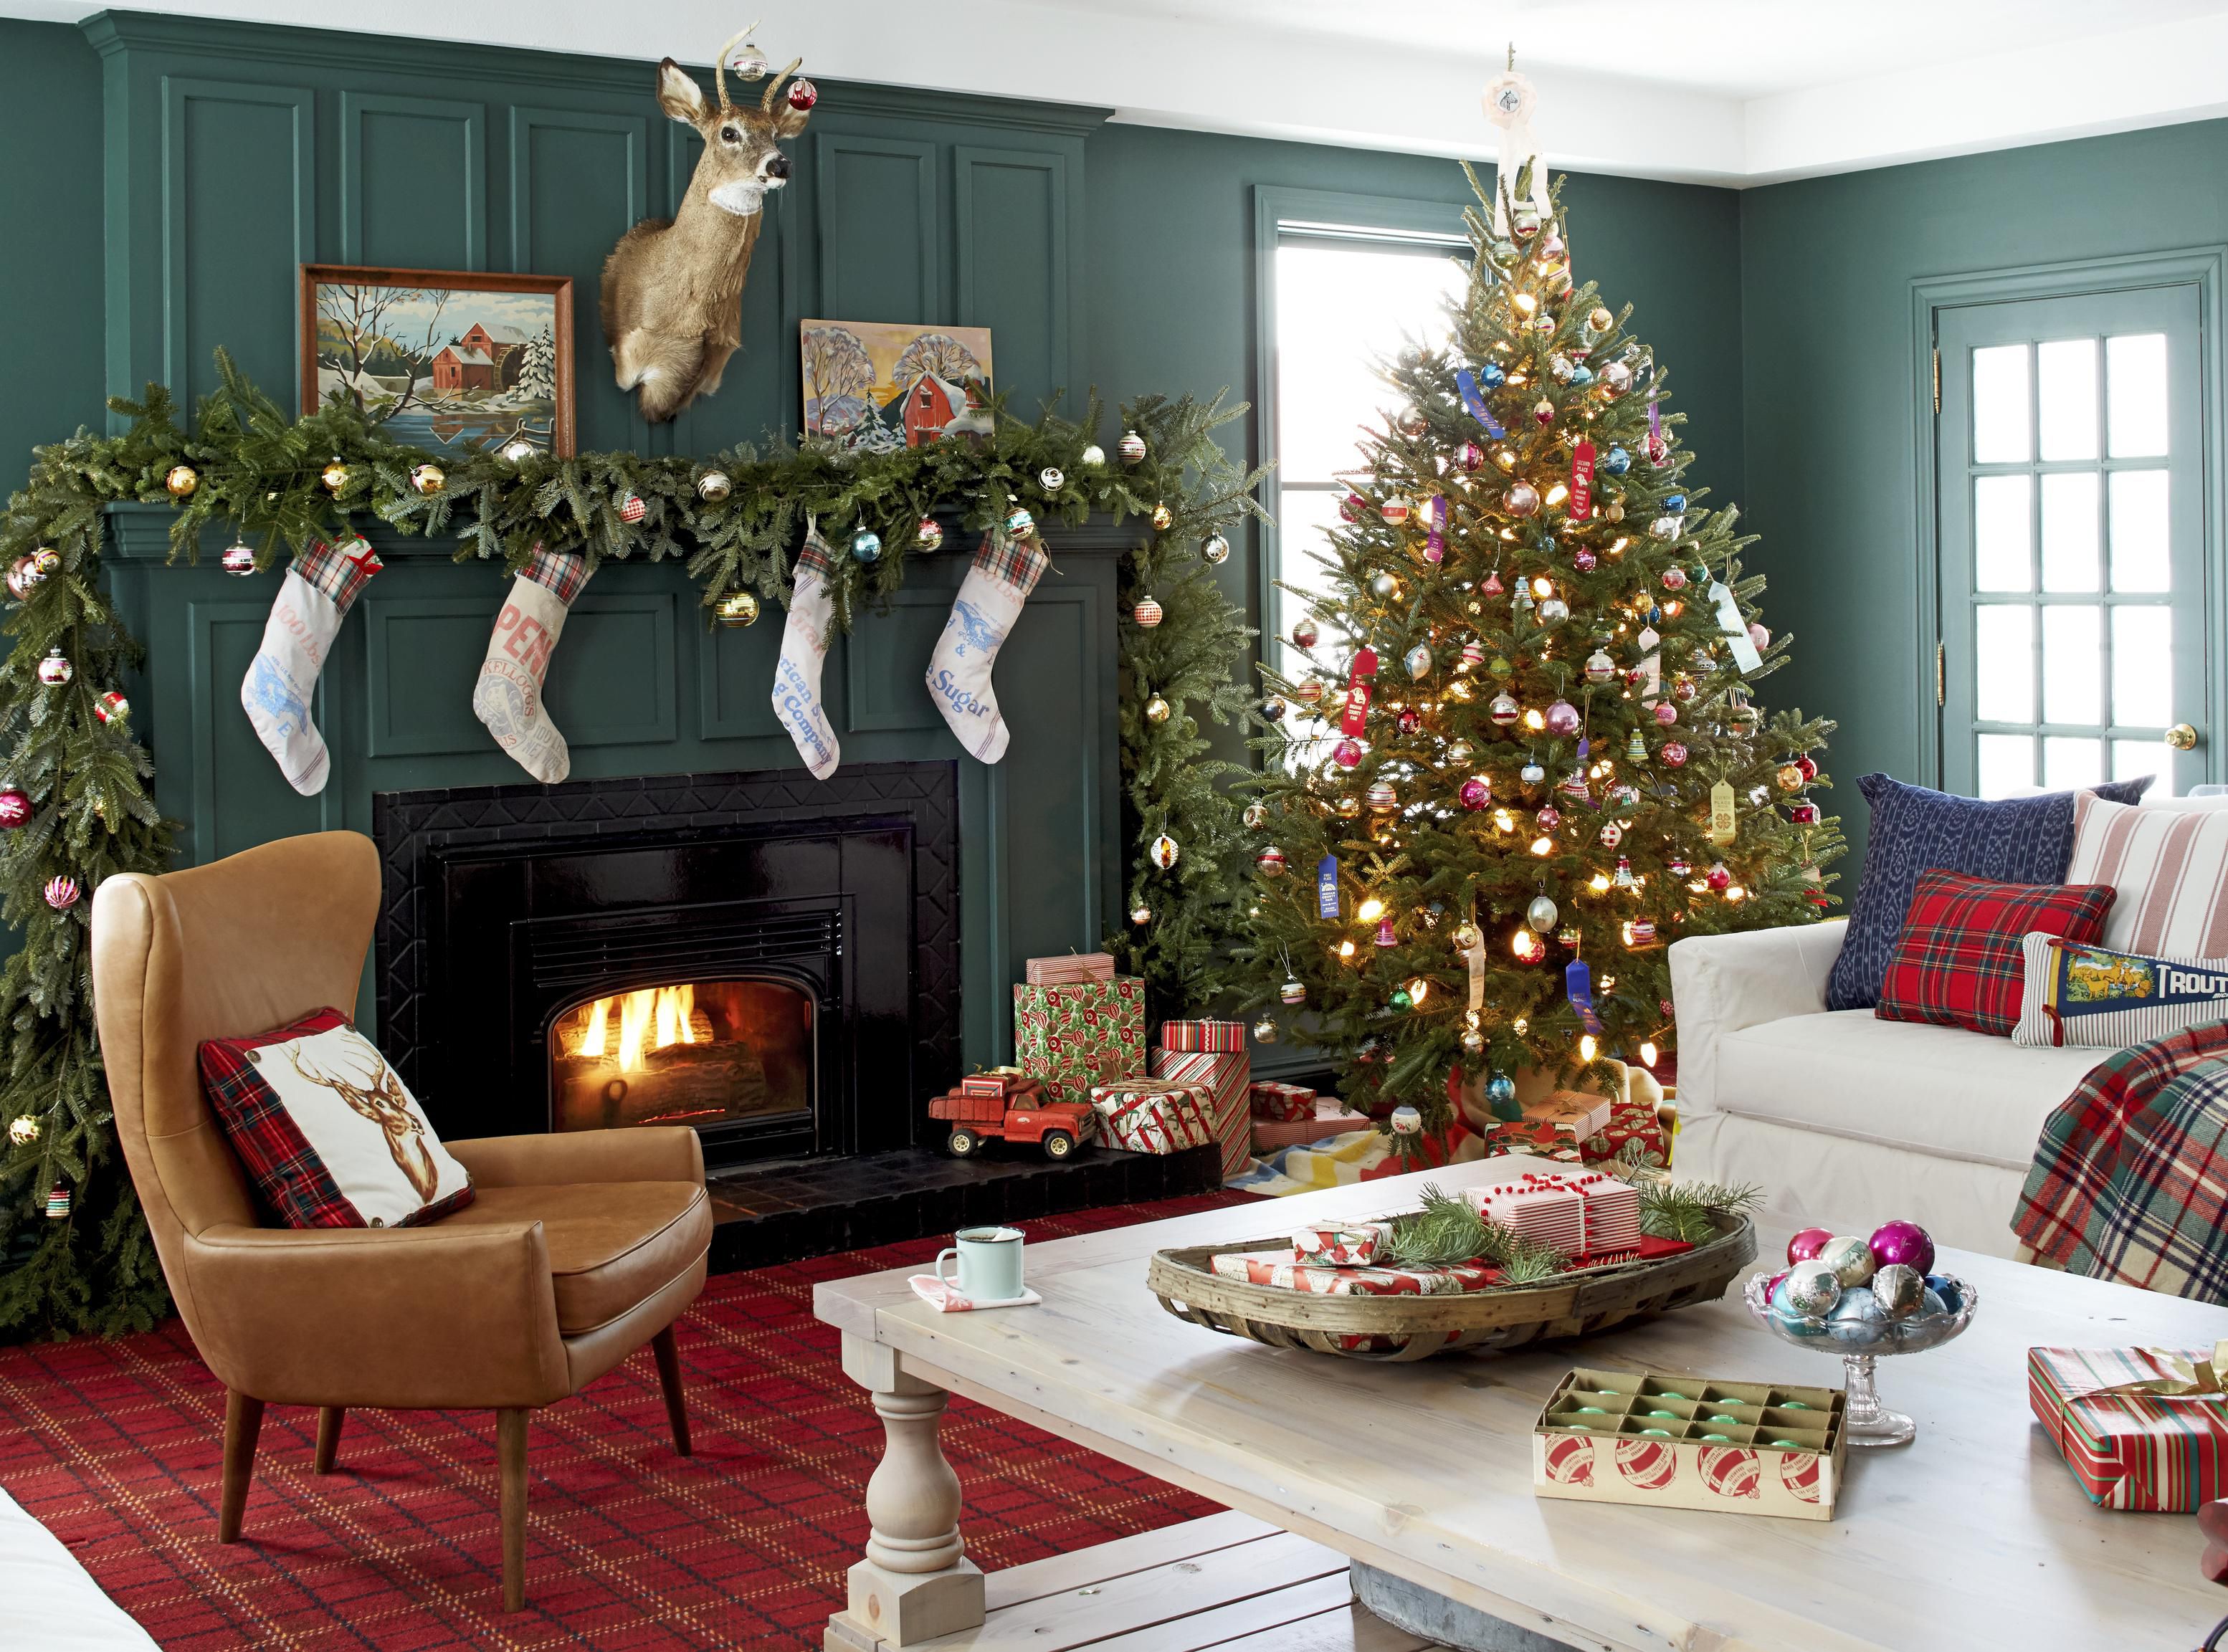 Christmas Living Room Decorating Ideas to Decorate a Living Room for Christmas